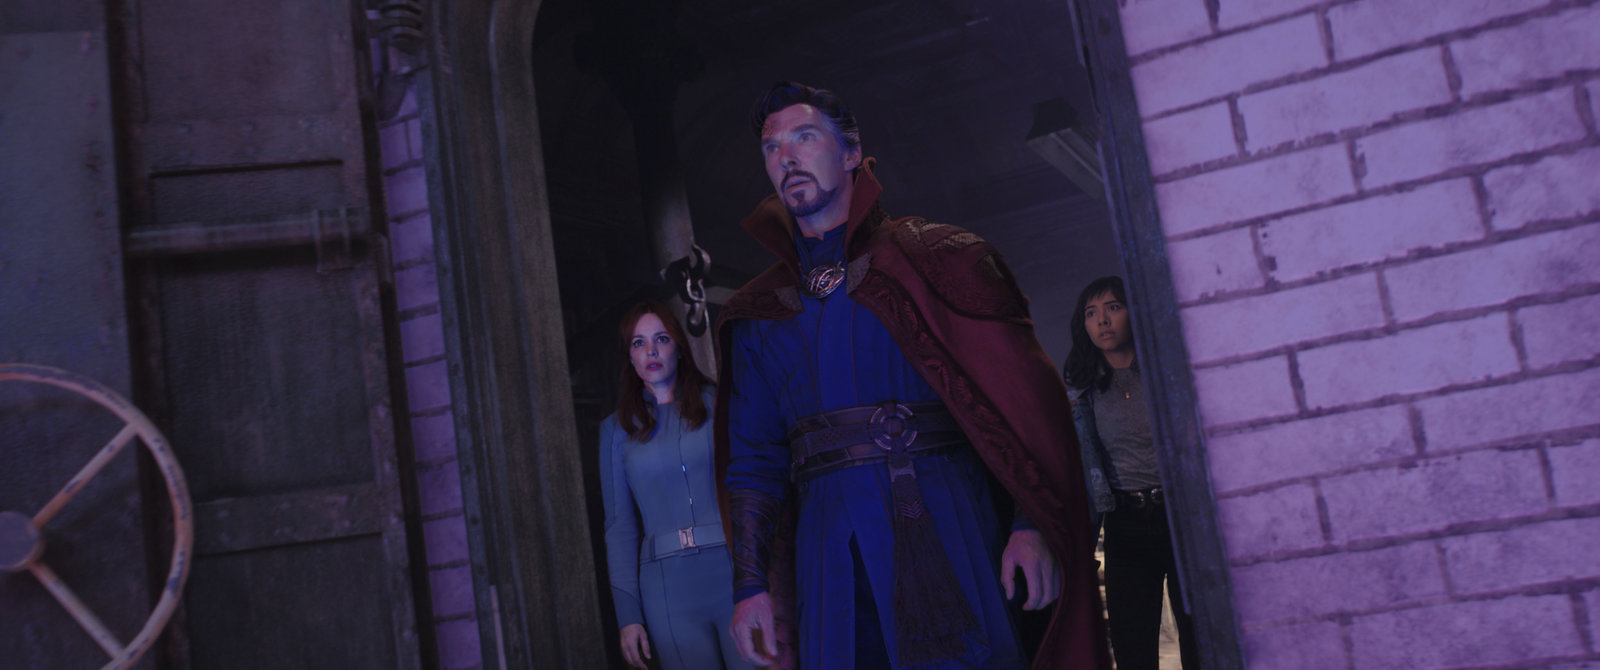 Doctor Strange in the Multiverse of Madness (blu-ray)